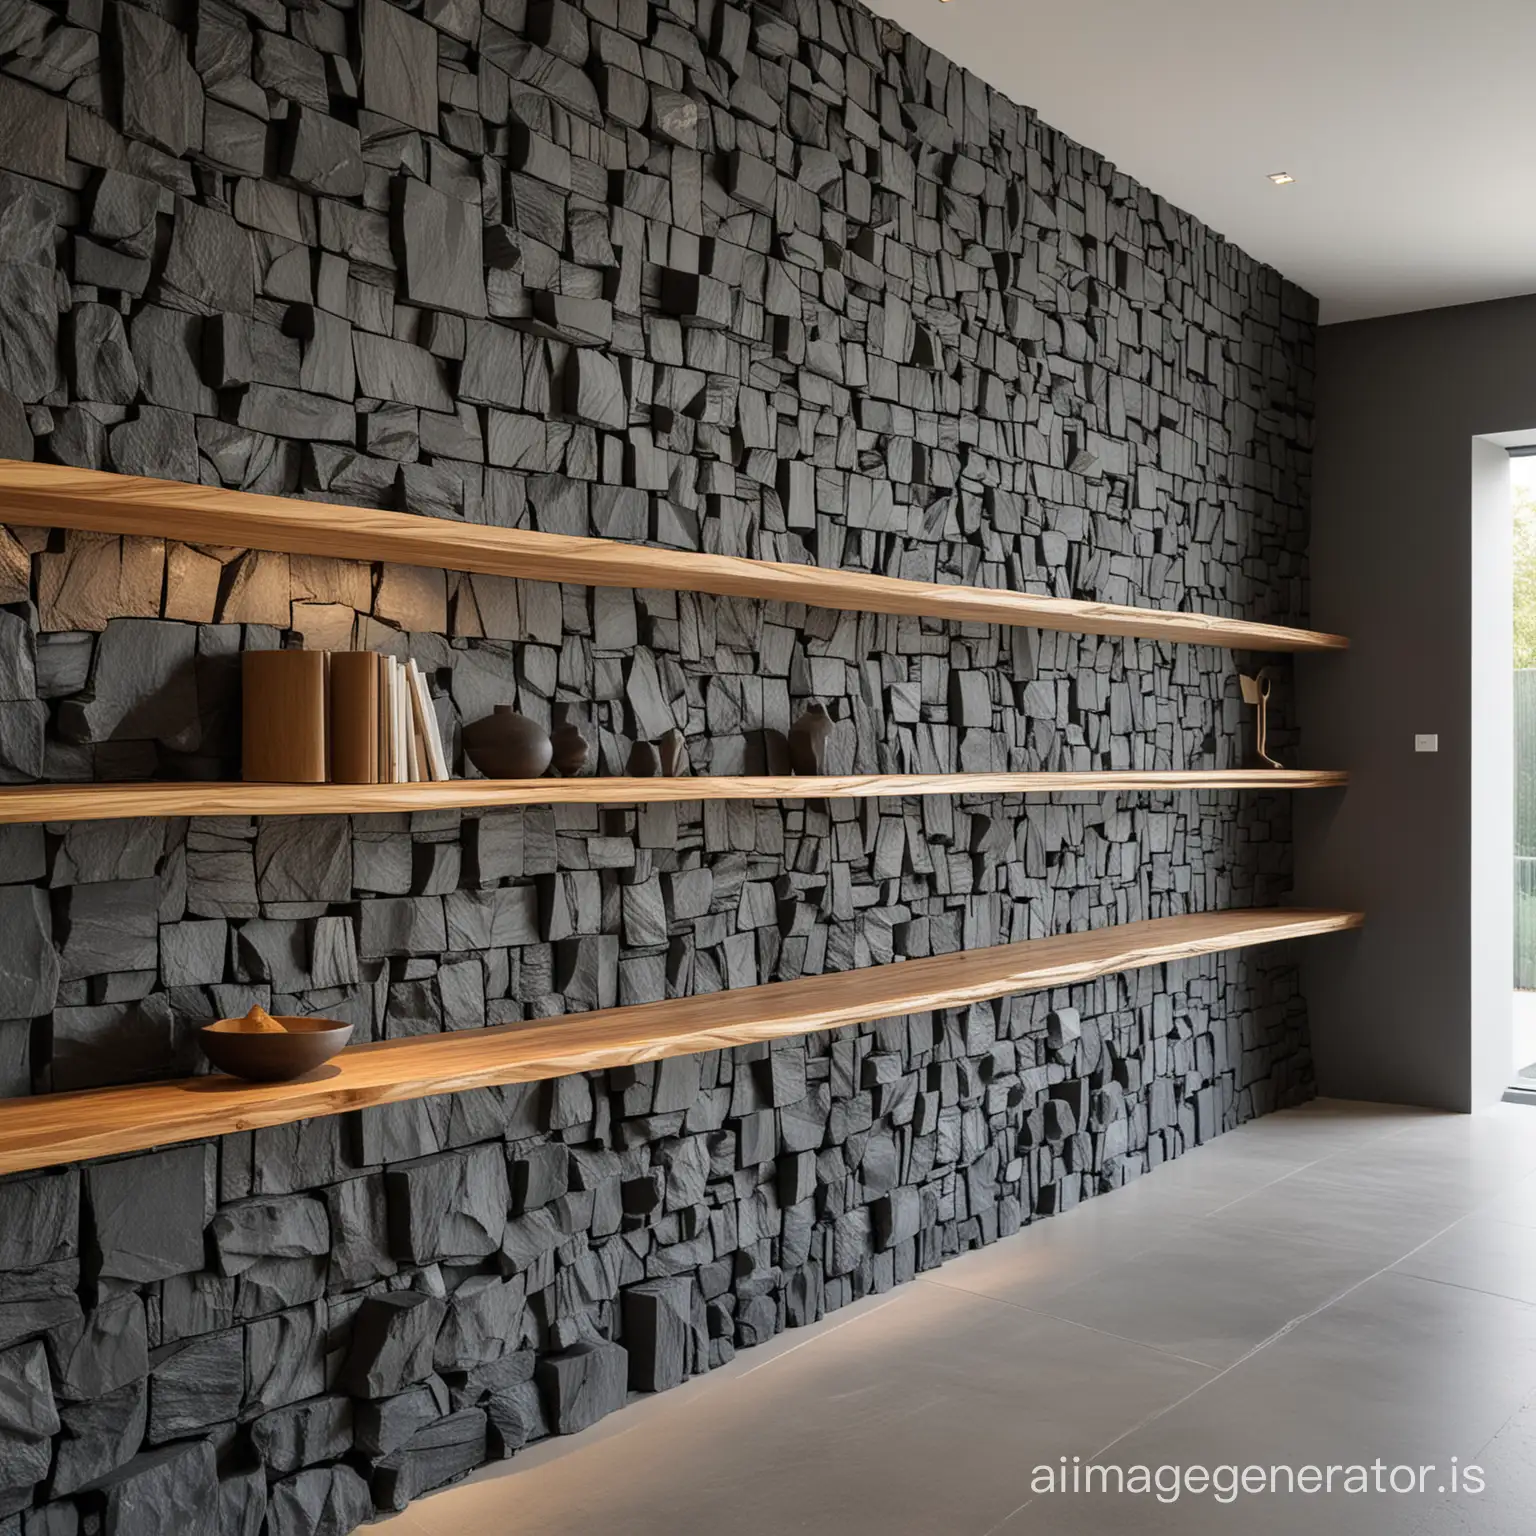 Functional-Wooden-Bookcase-Covering-Cut-Basalt-Stone-Wall